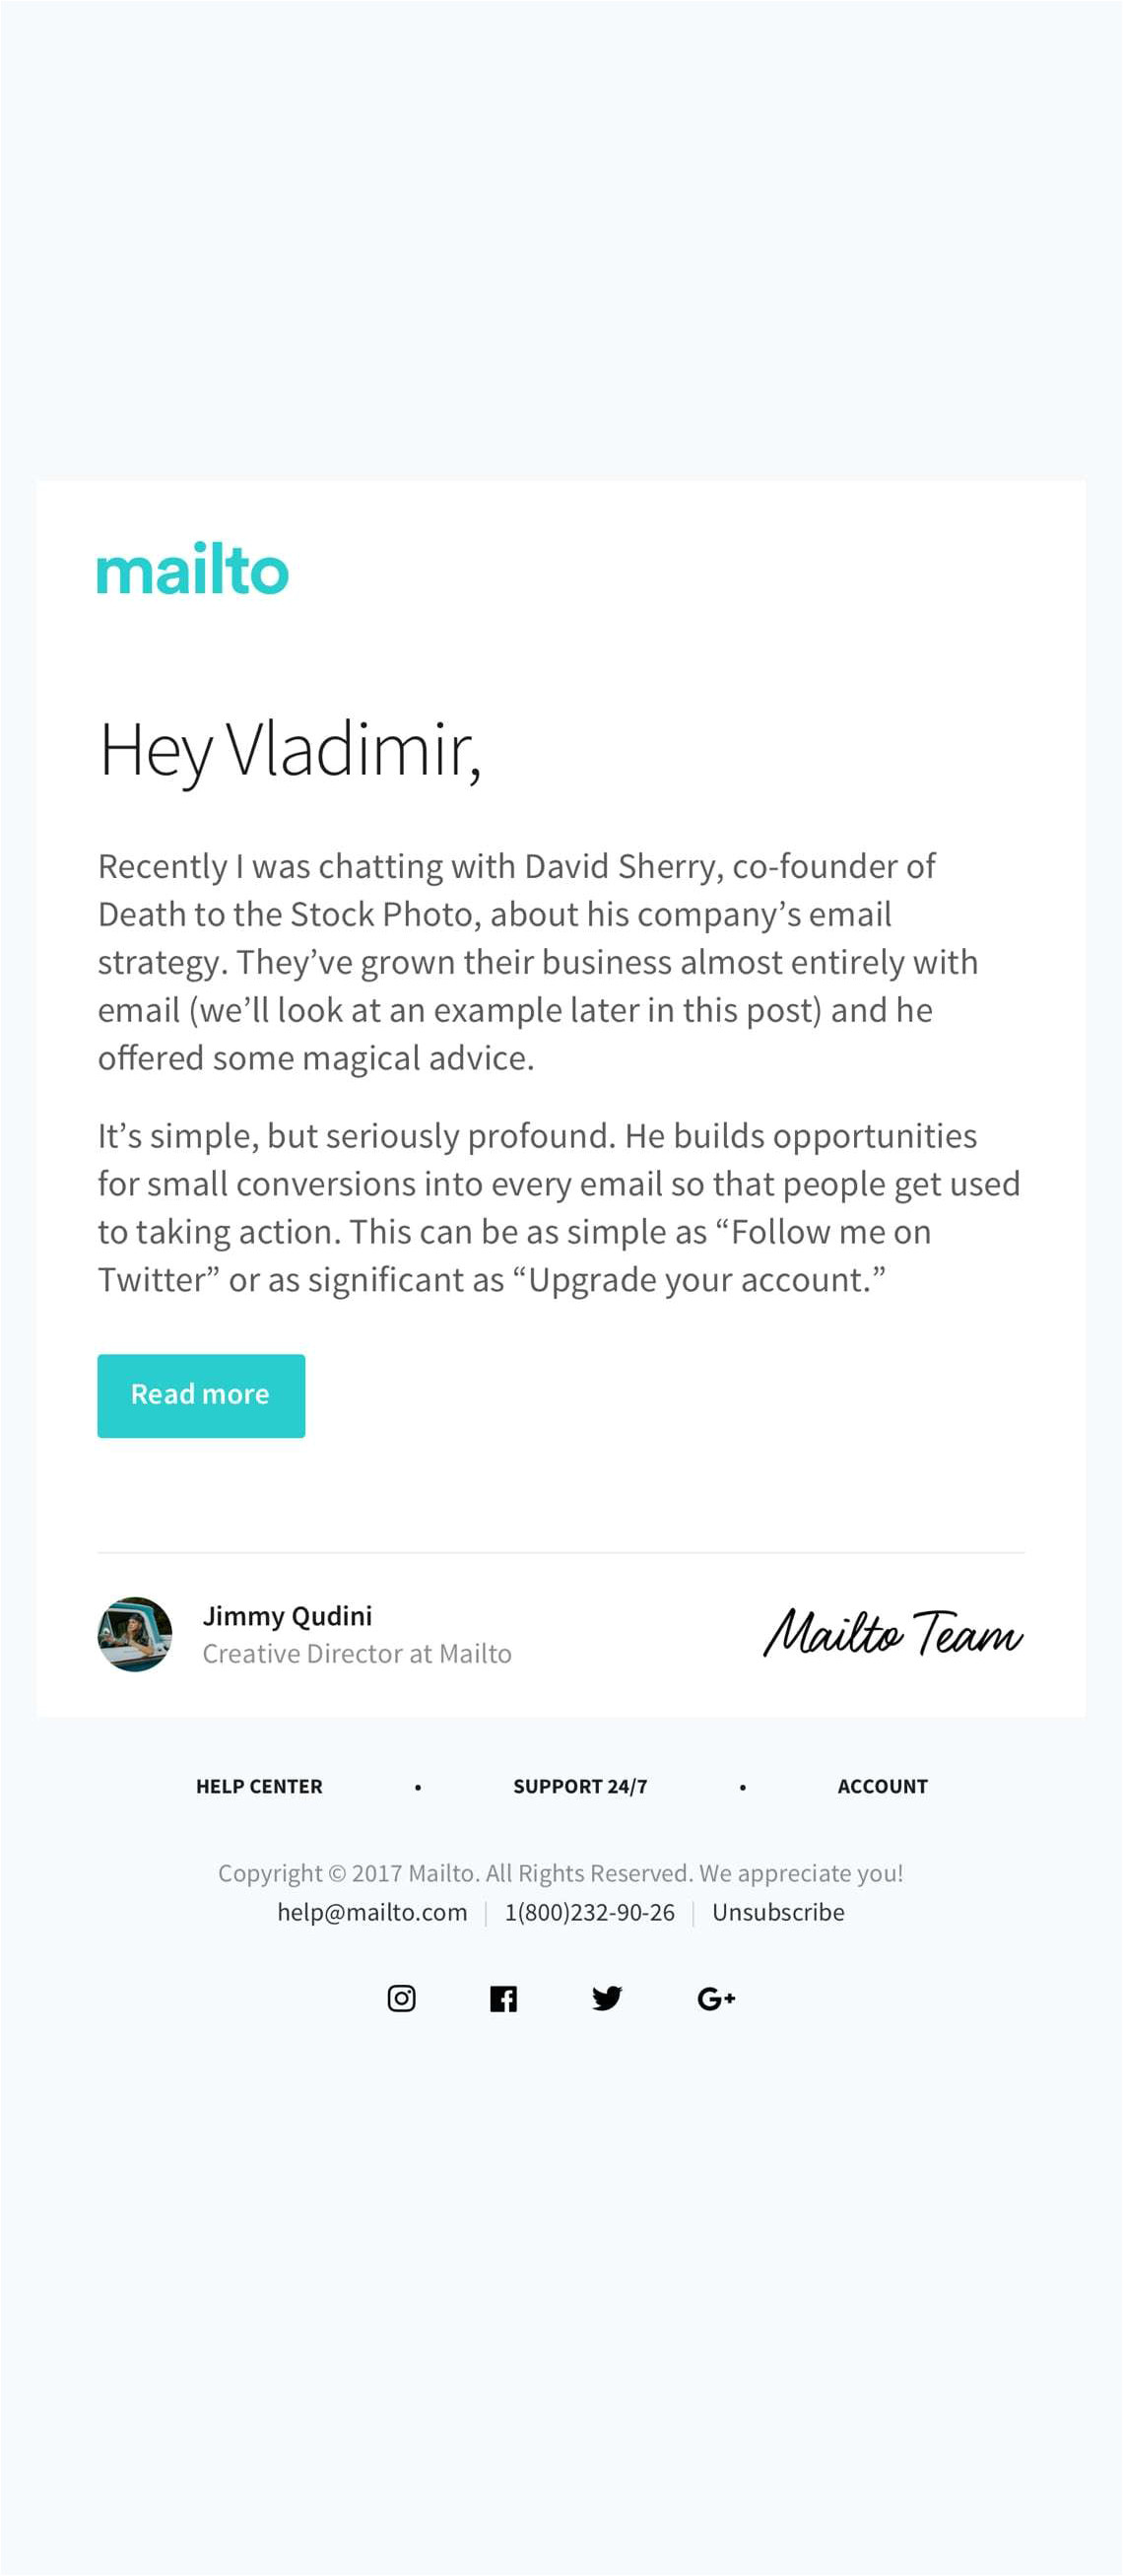 free responsive html email templates